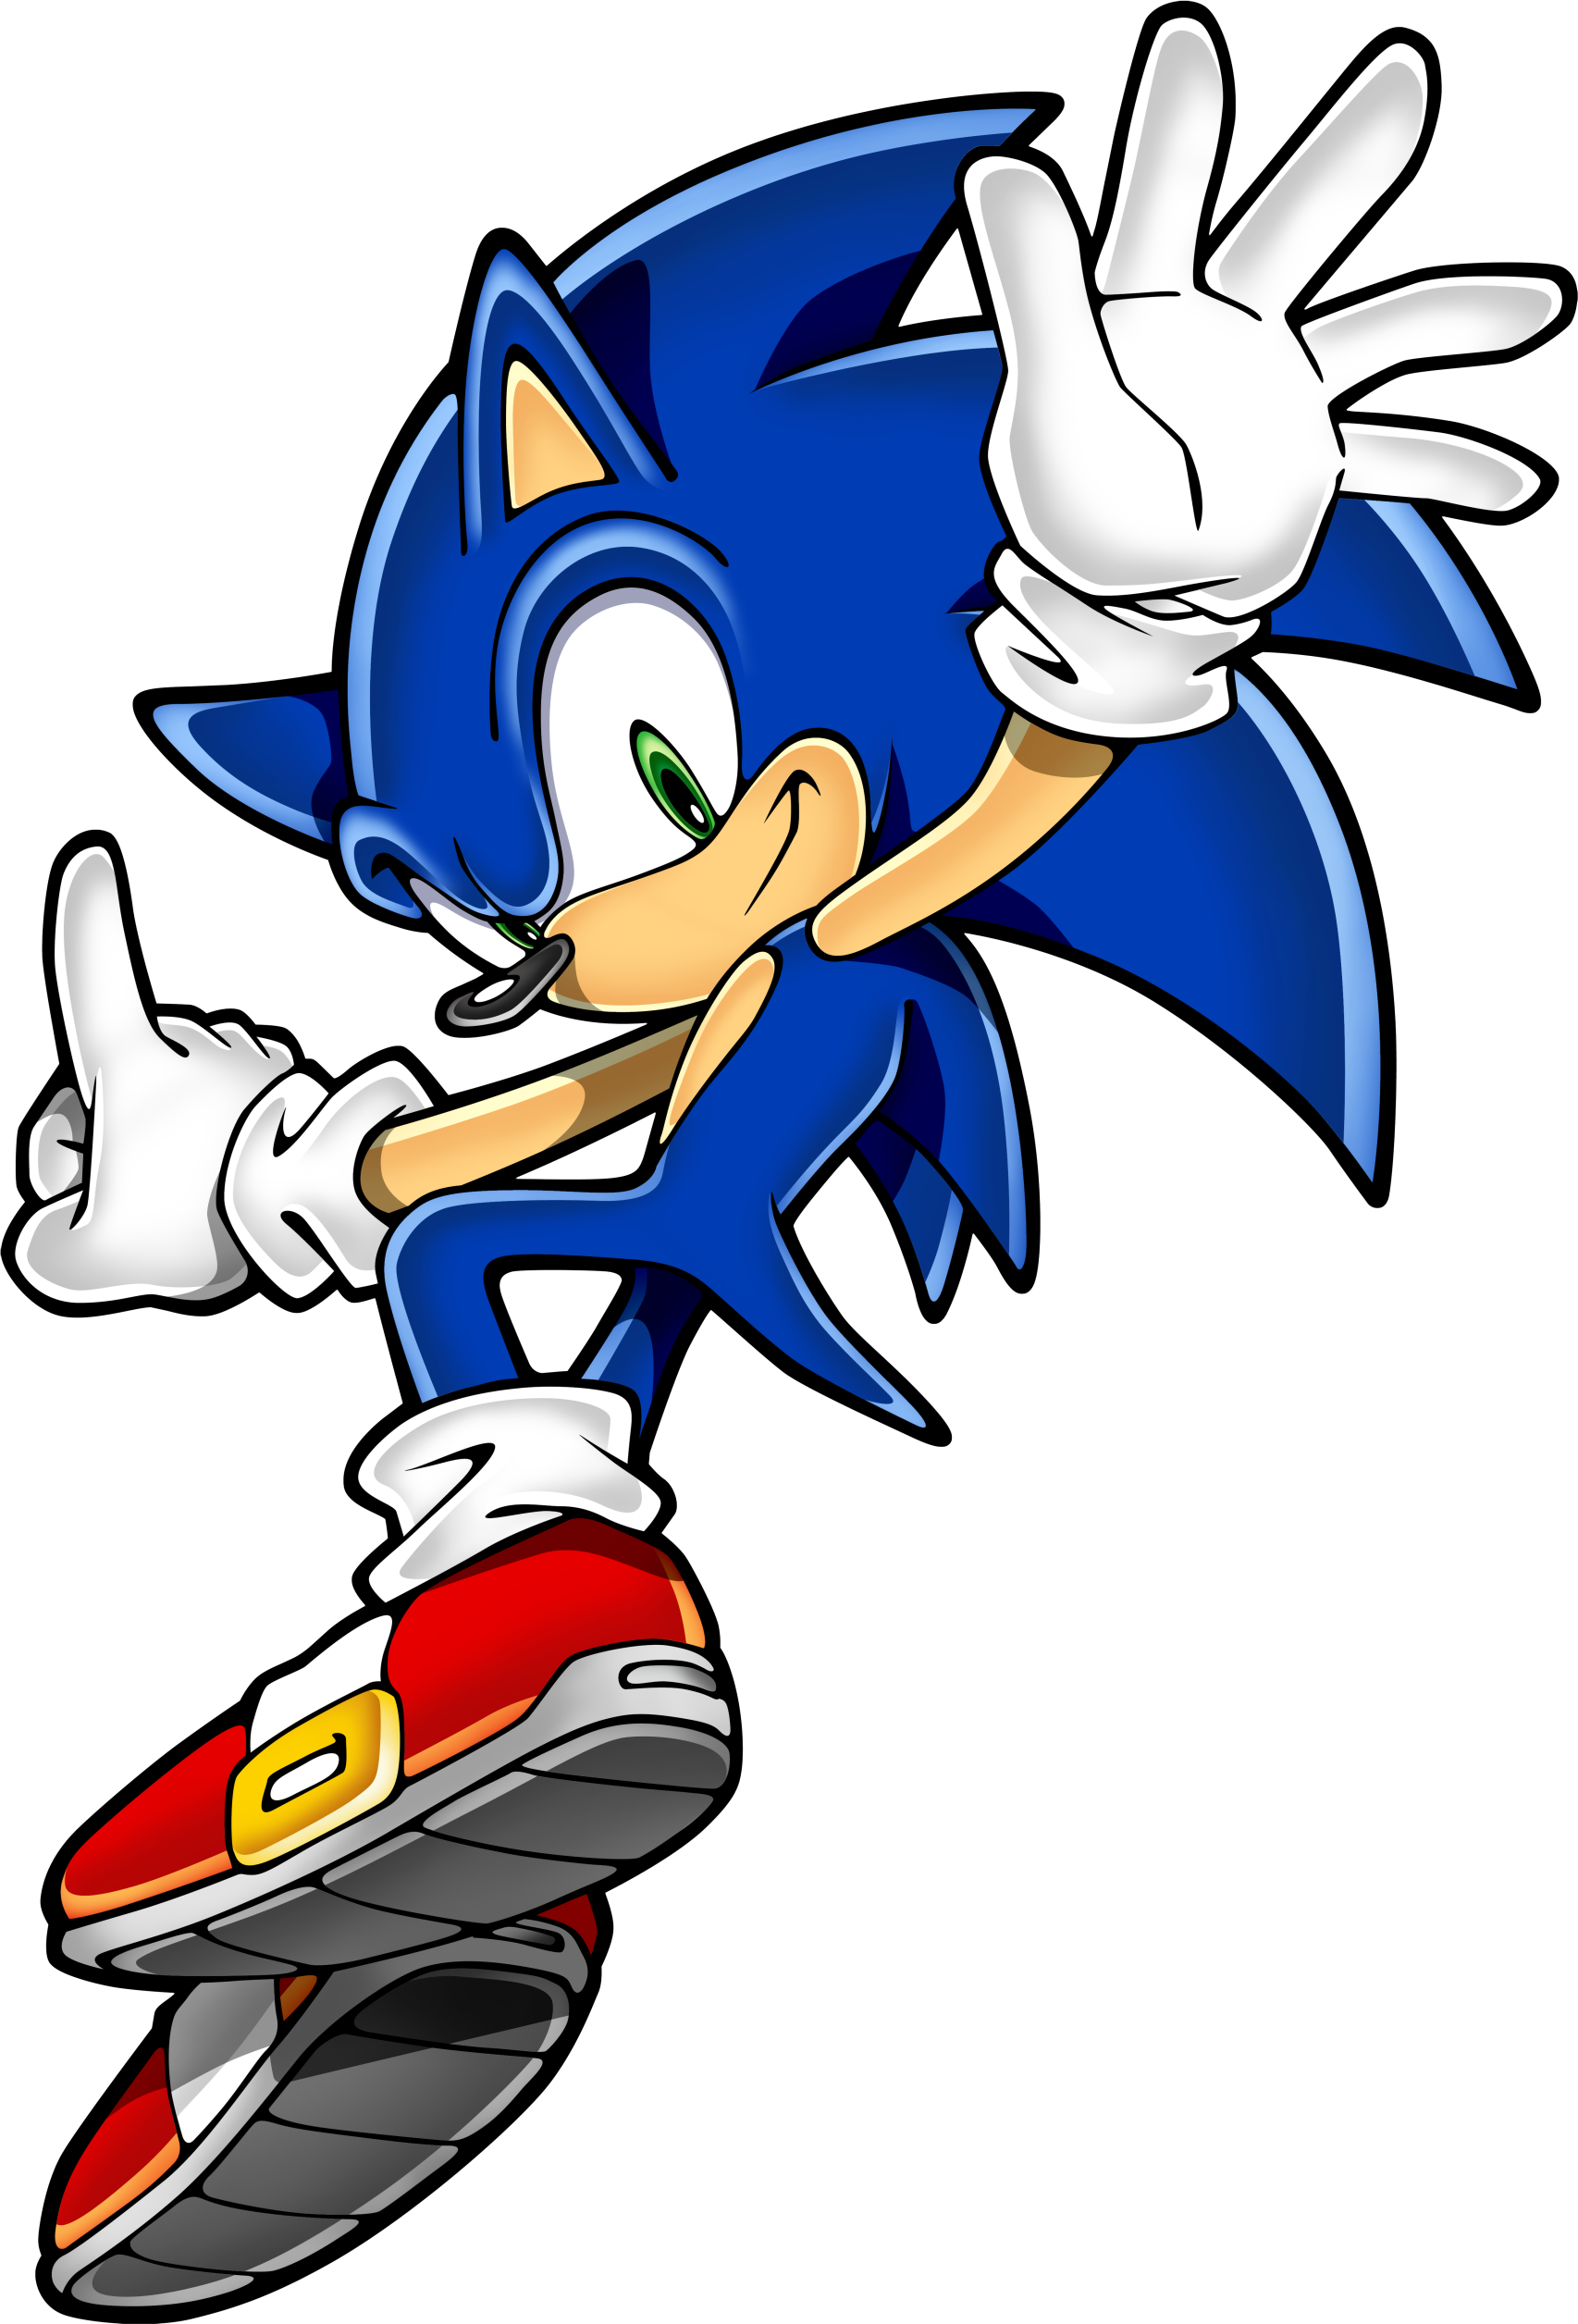 Sonic Art Assets Dvd   Sonic The Hedgehog   11.png - Sonic The Hedgehog, Transparent background PNG HD thumbnail